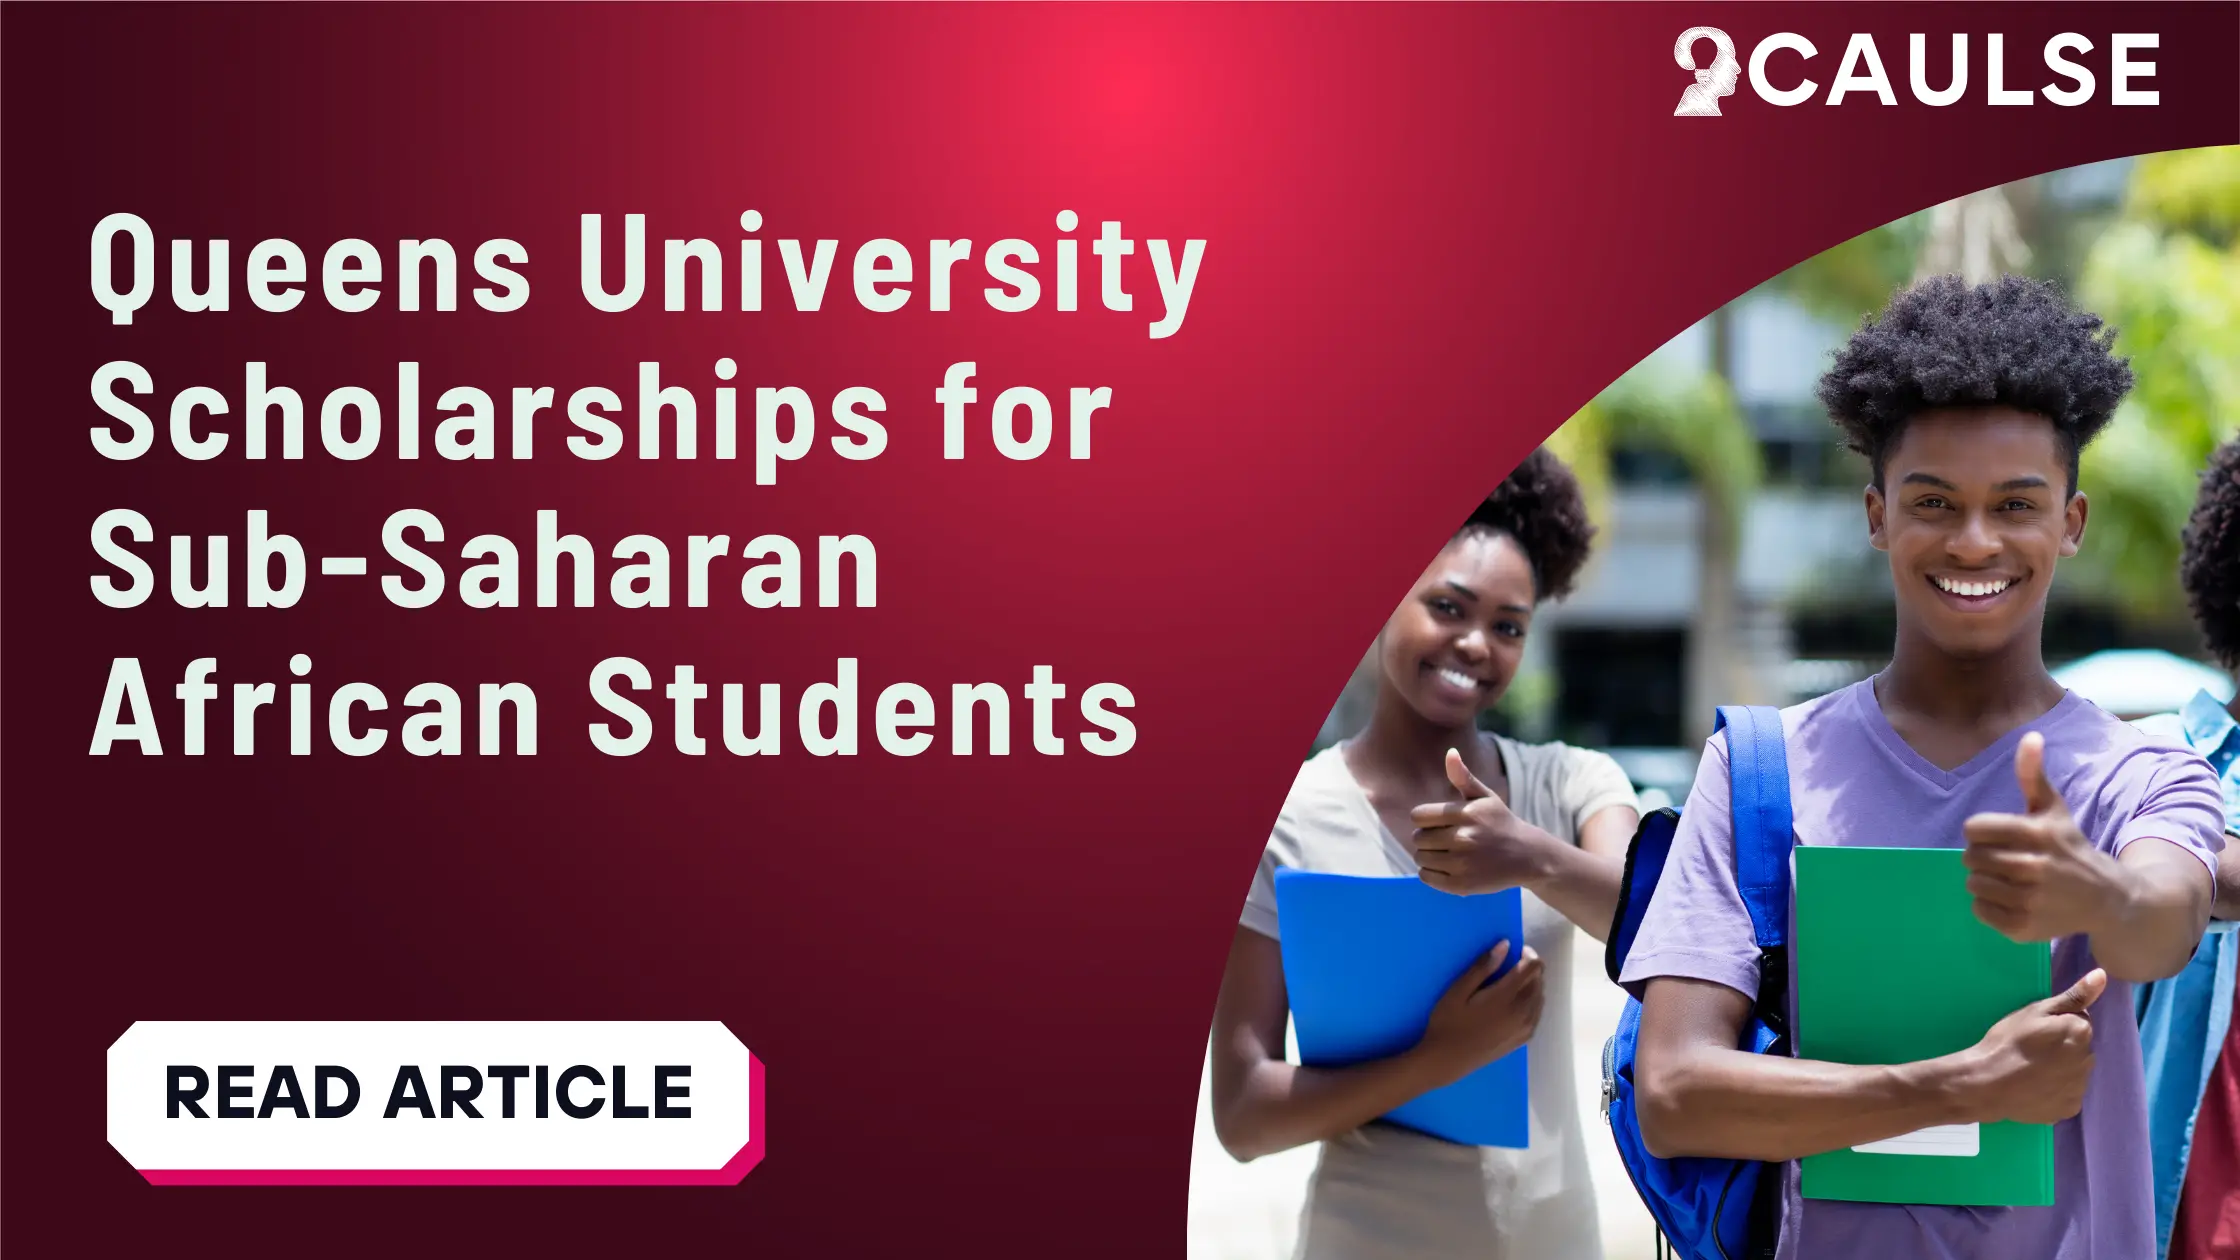 Queens University Scholarships for Sub-Saharan African Students